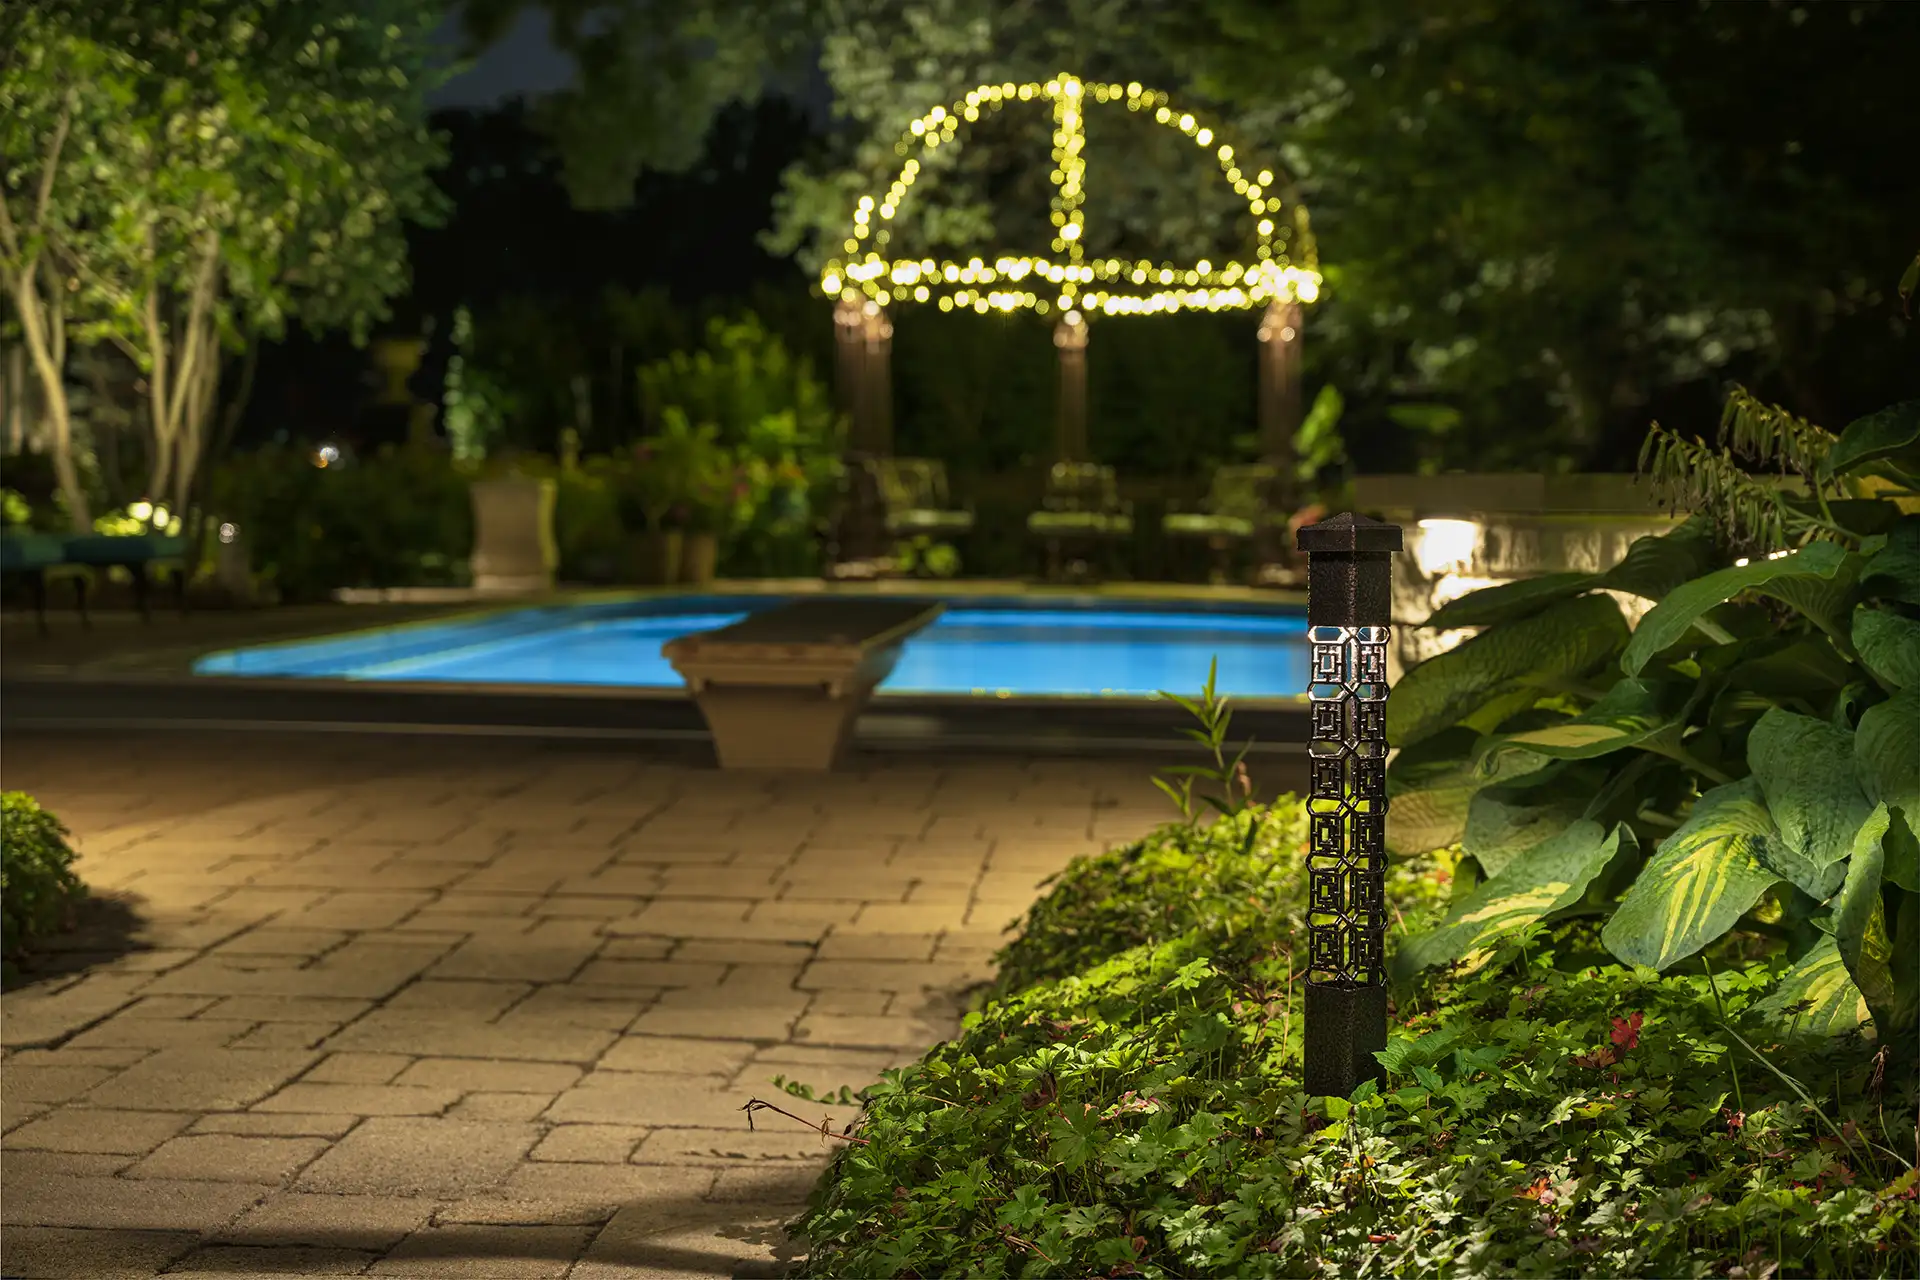 Fisher residence image 2 bollard lights and arbor by pool Lighthouse Outdoor Lighting and Audio Indianapolis IN Indiana